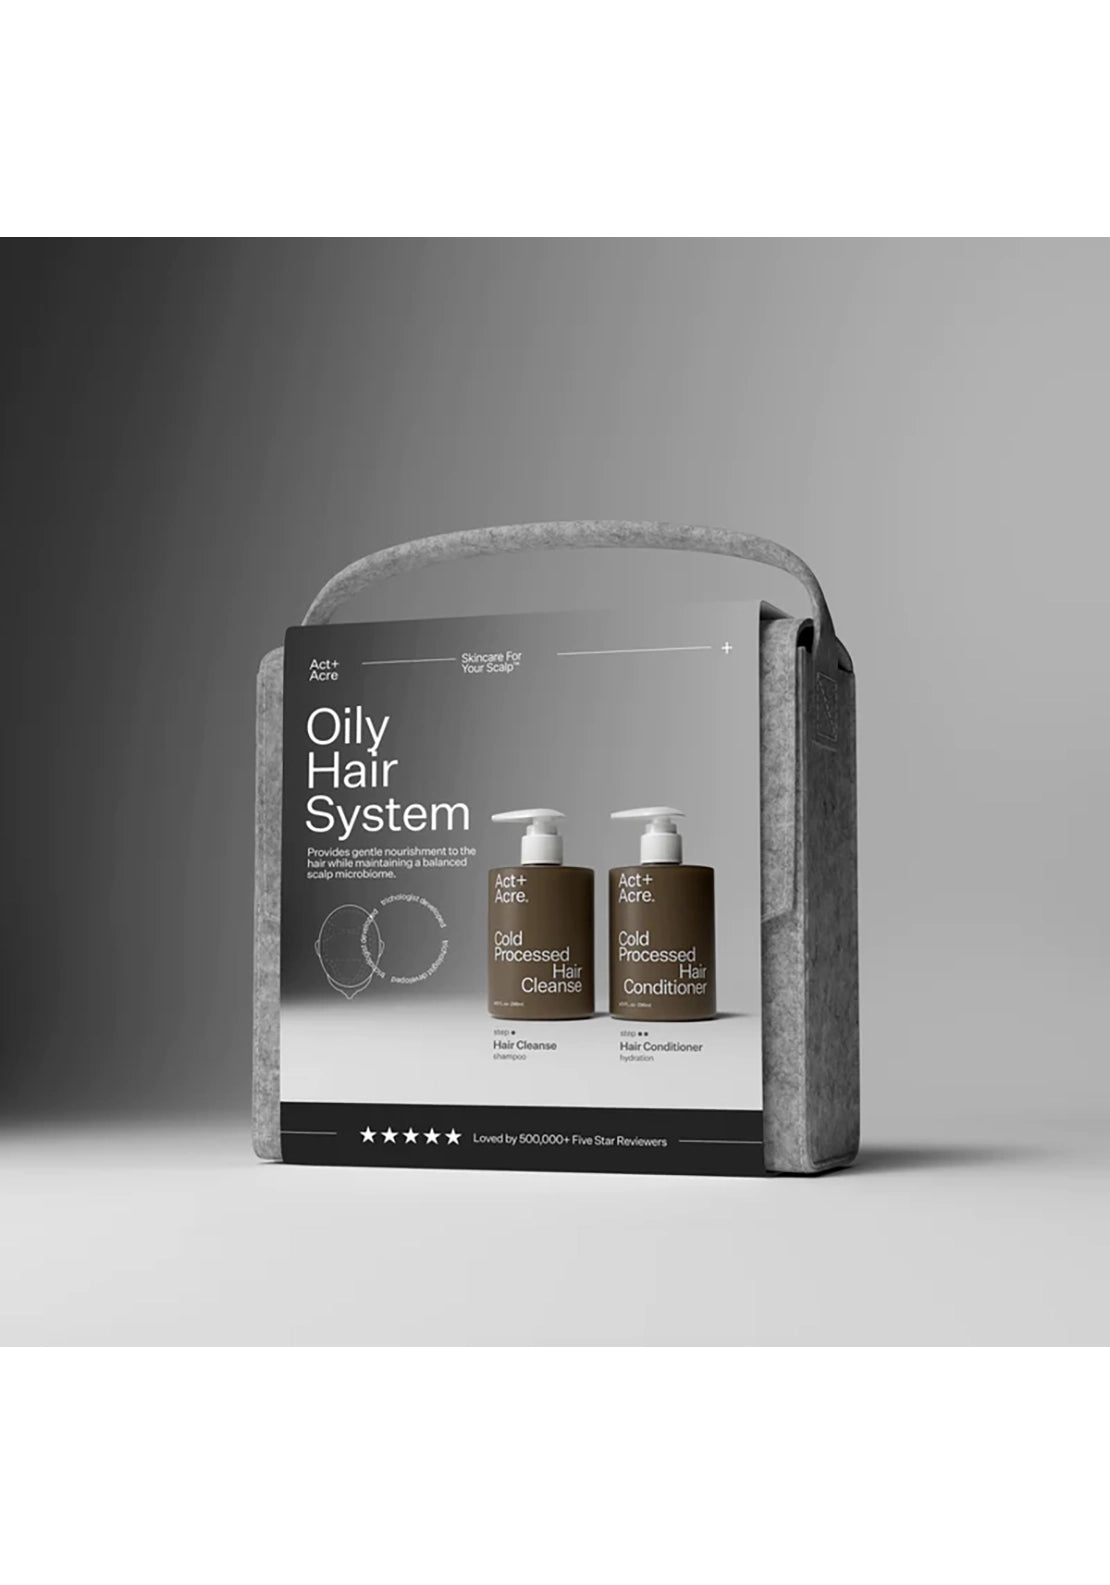 Act+acre Oily Hair System 1 Shaws Department Stores